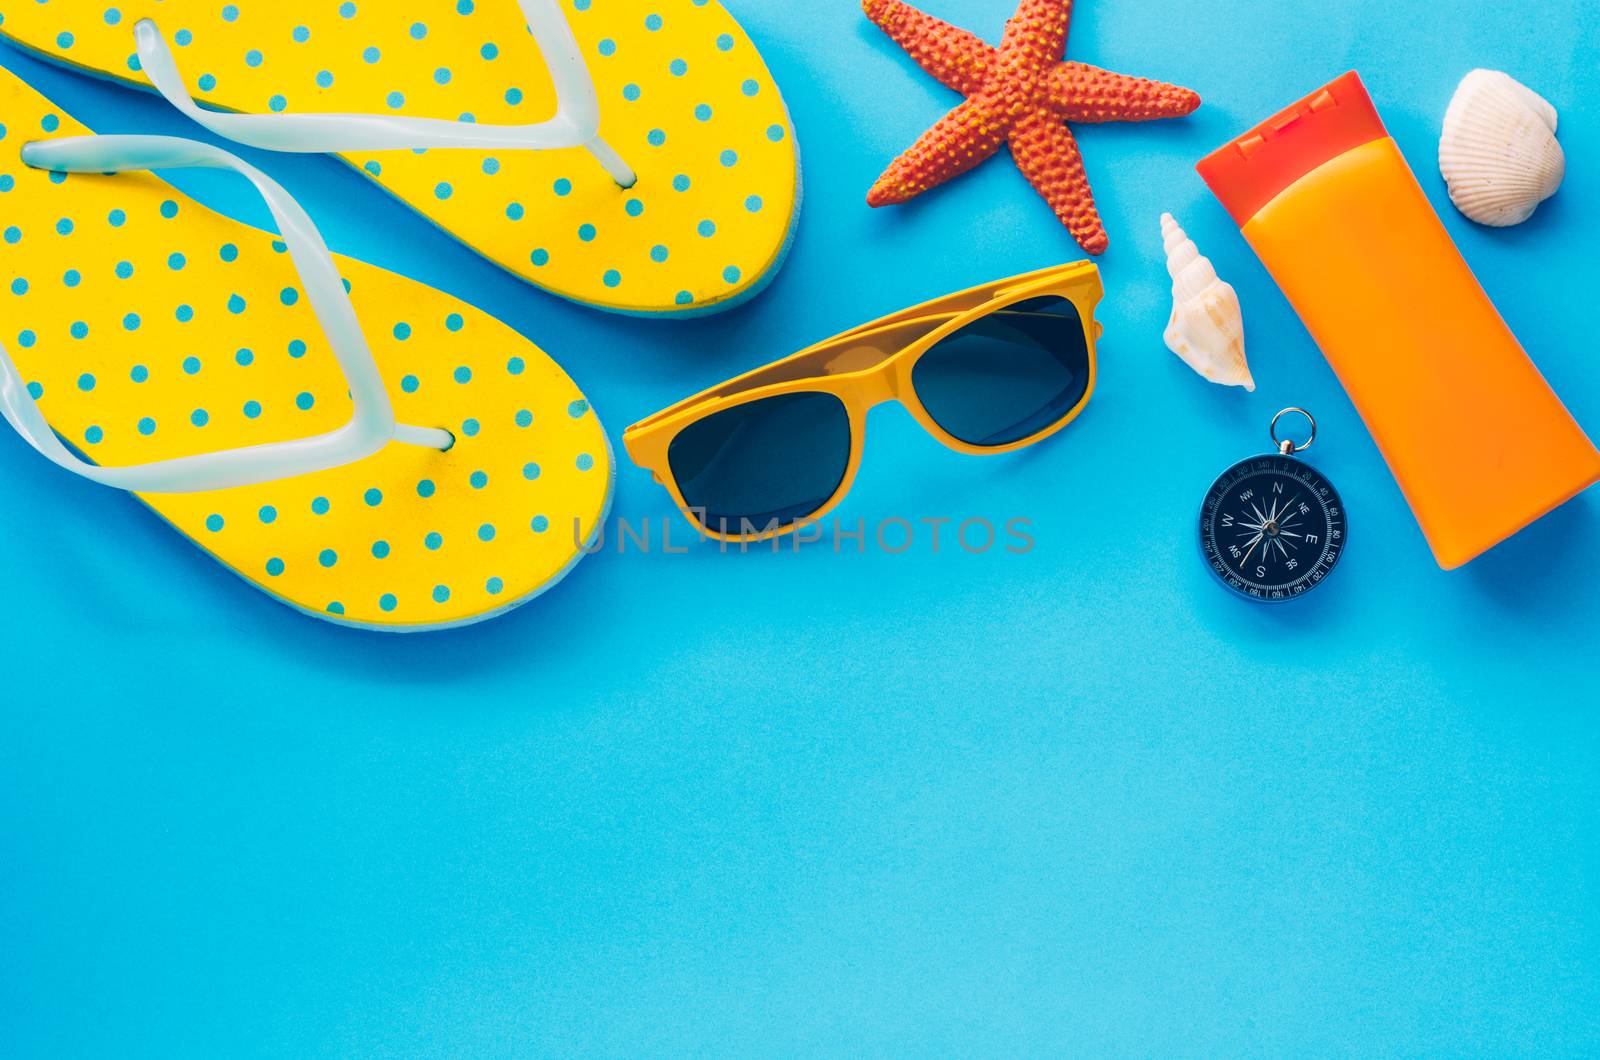 Clothing accessories for summer on blue paper floor - concept li by photobyphotoboy